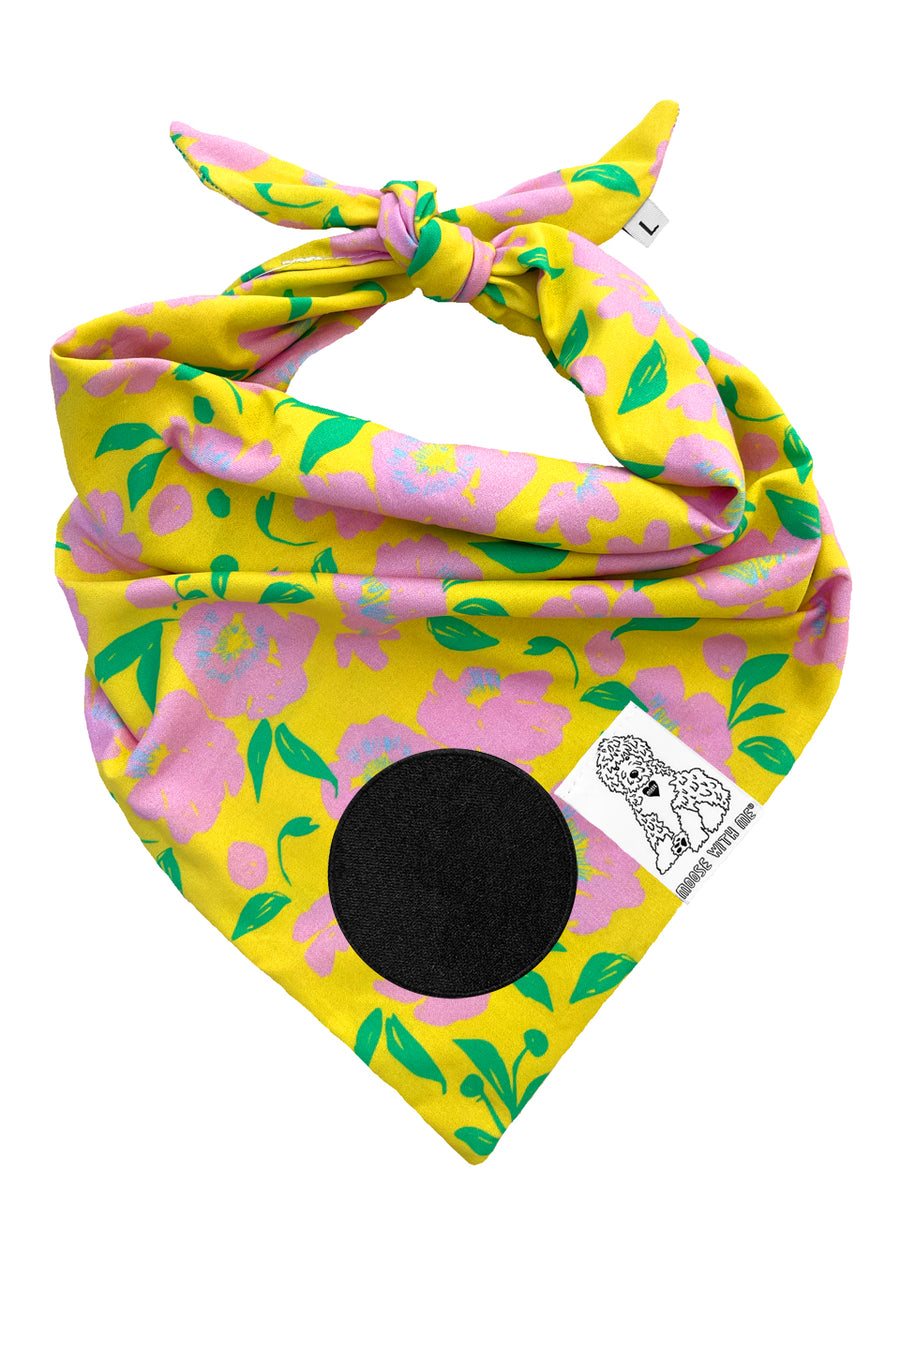 Dog Bandana Blooms - Customize with Interchangeable Velcro Patches